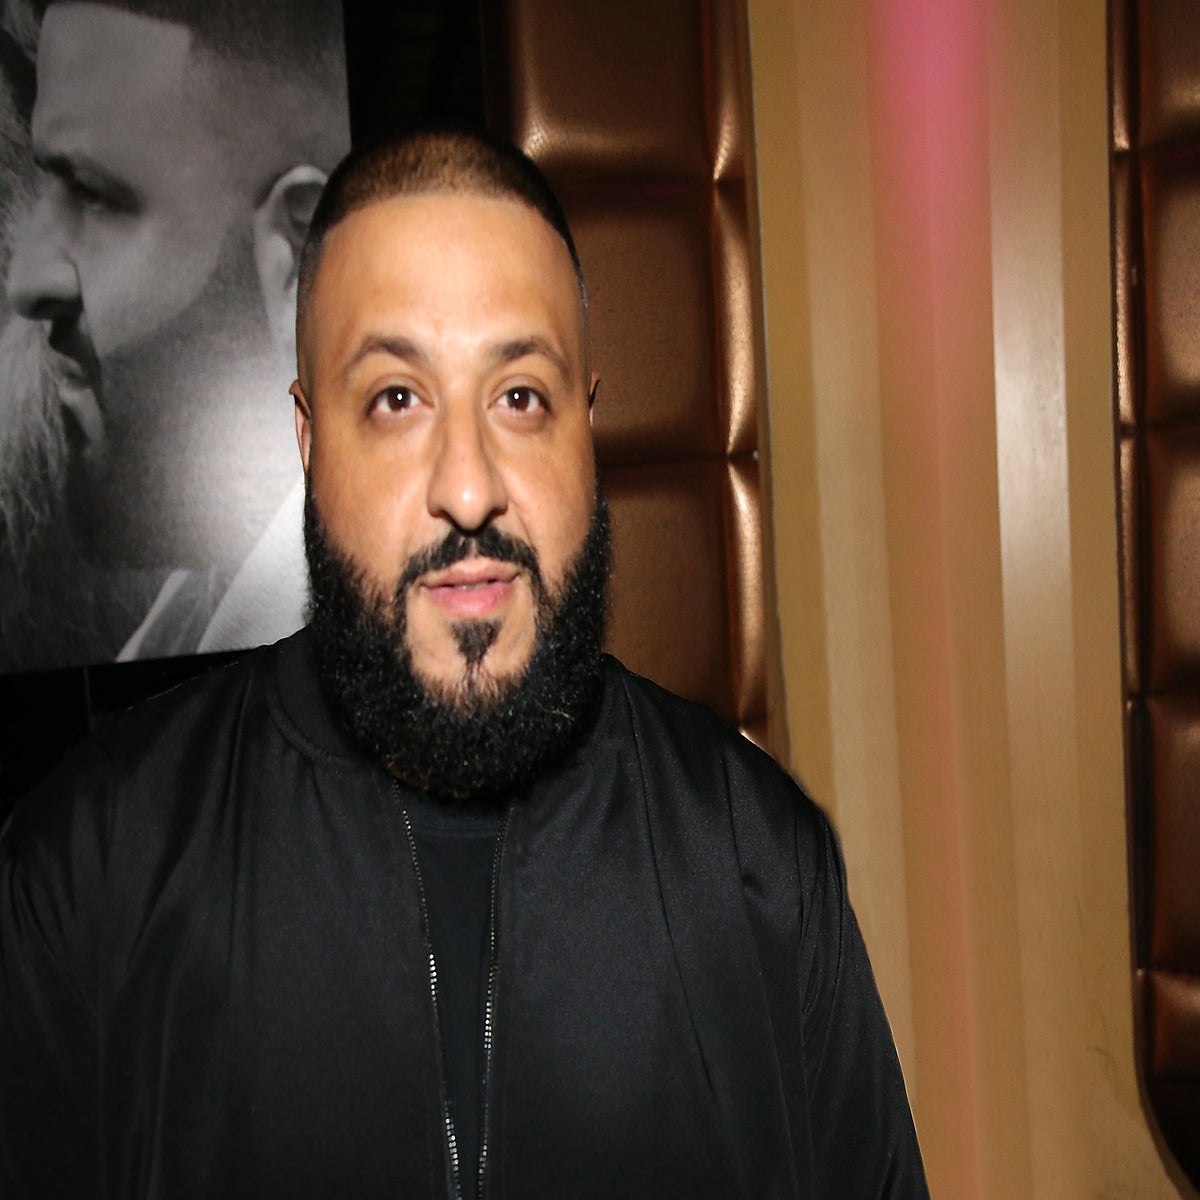 DJ Khaled said he does not perform oral sex on women because 'there are  different rules for men' | The Independent | The Independent